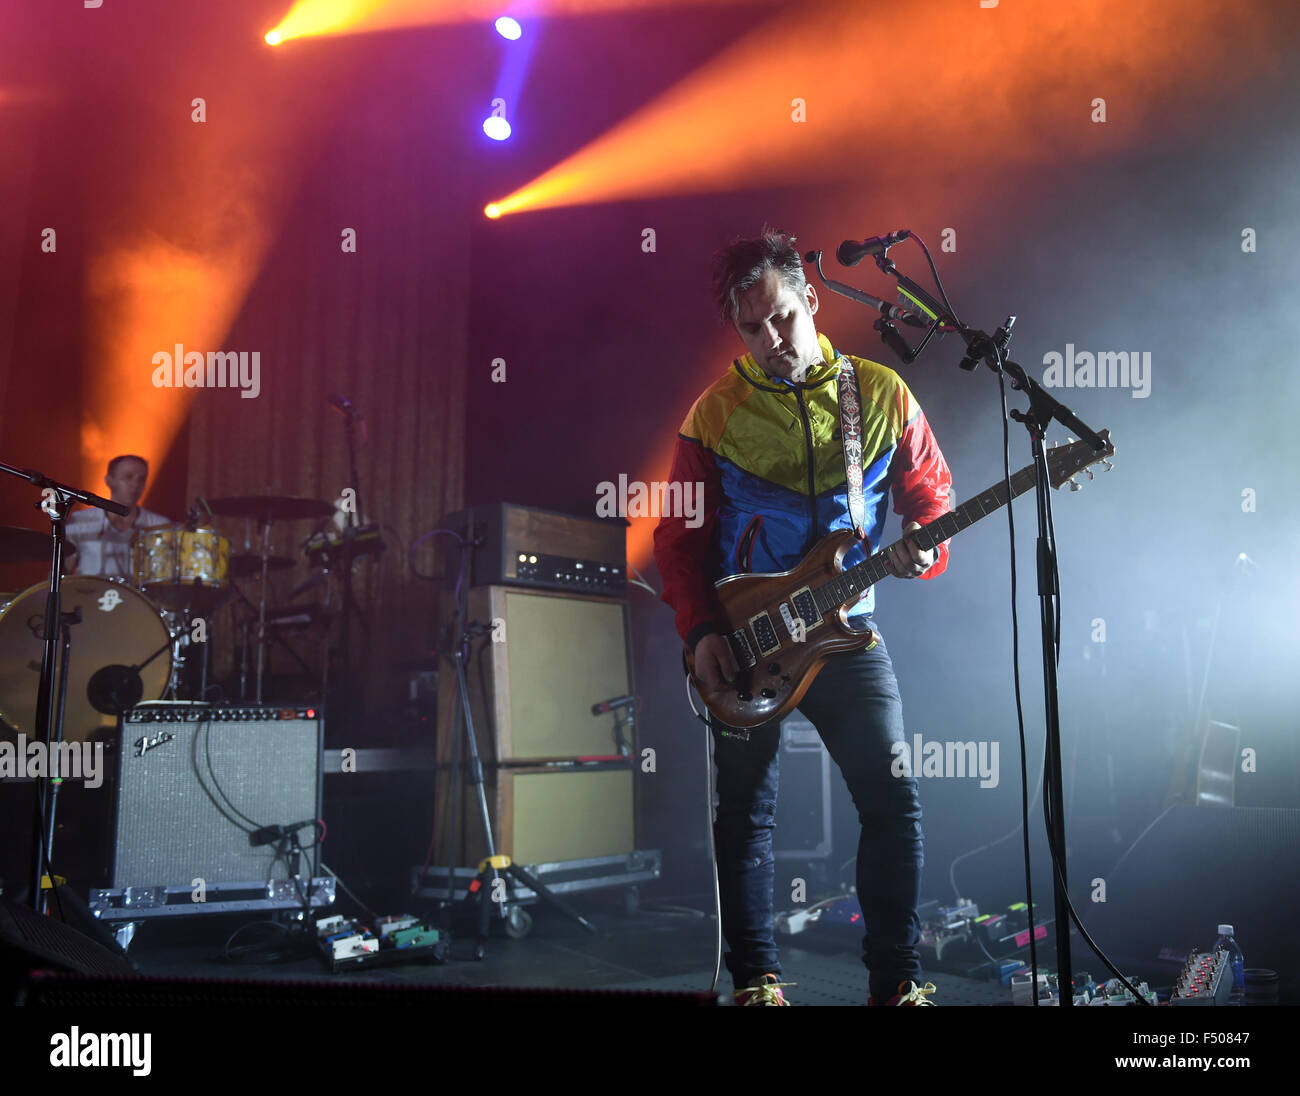 Norfolk, VIRGINIA, USA. 24th Oct, 2015. MODEST MOUSE comes to the CONSTANT CENTER at OLD DOMINION UNIVERSITY in NORFOLK, VIRGINIA on 24 OCTOBER 2015. © Jeff Moore/ZUMA Wire/Alamy Live News Stock Photo